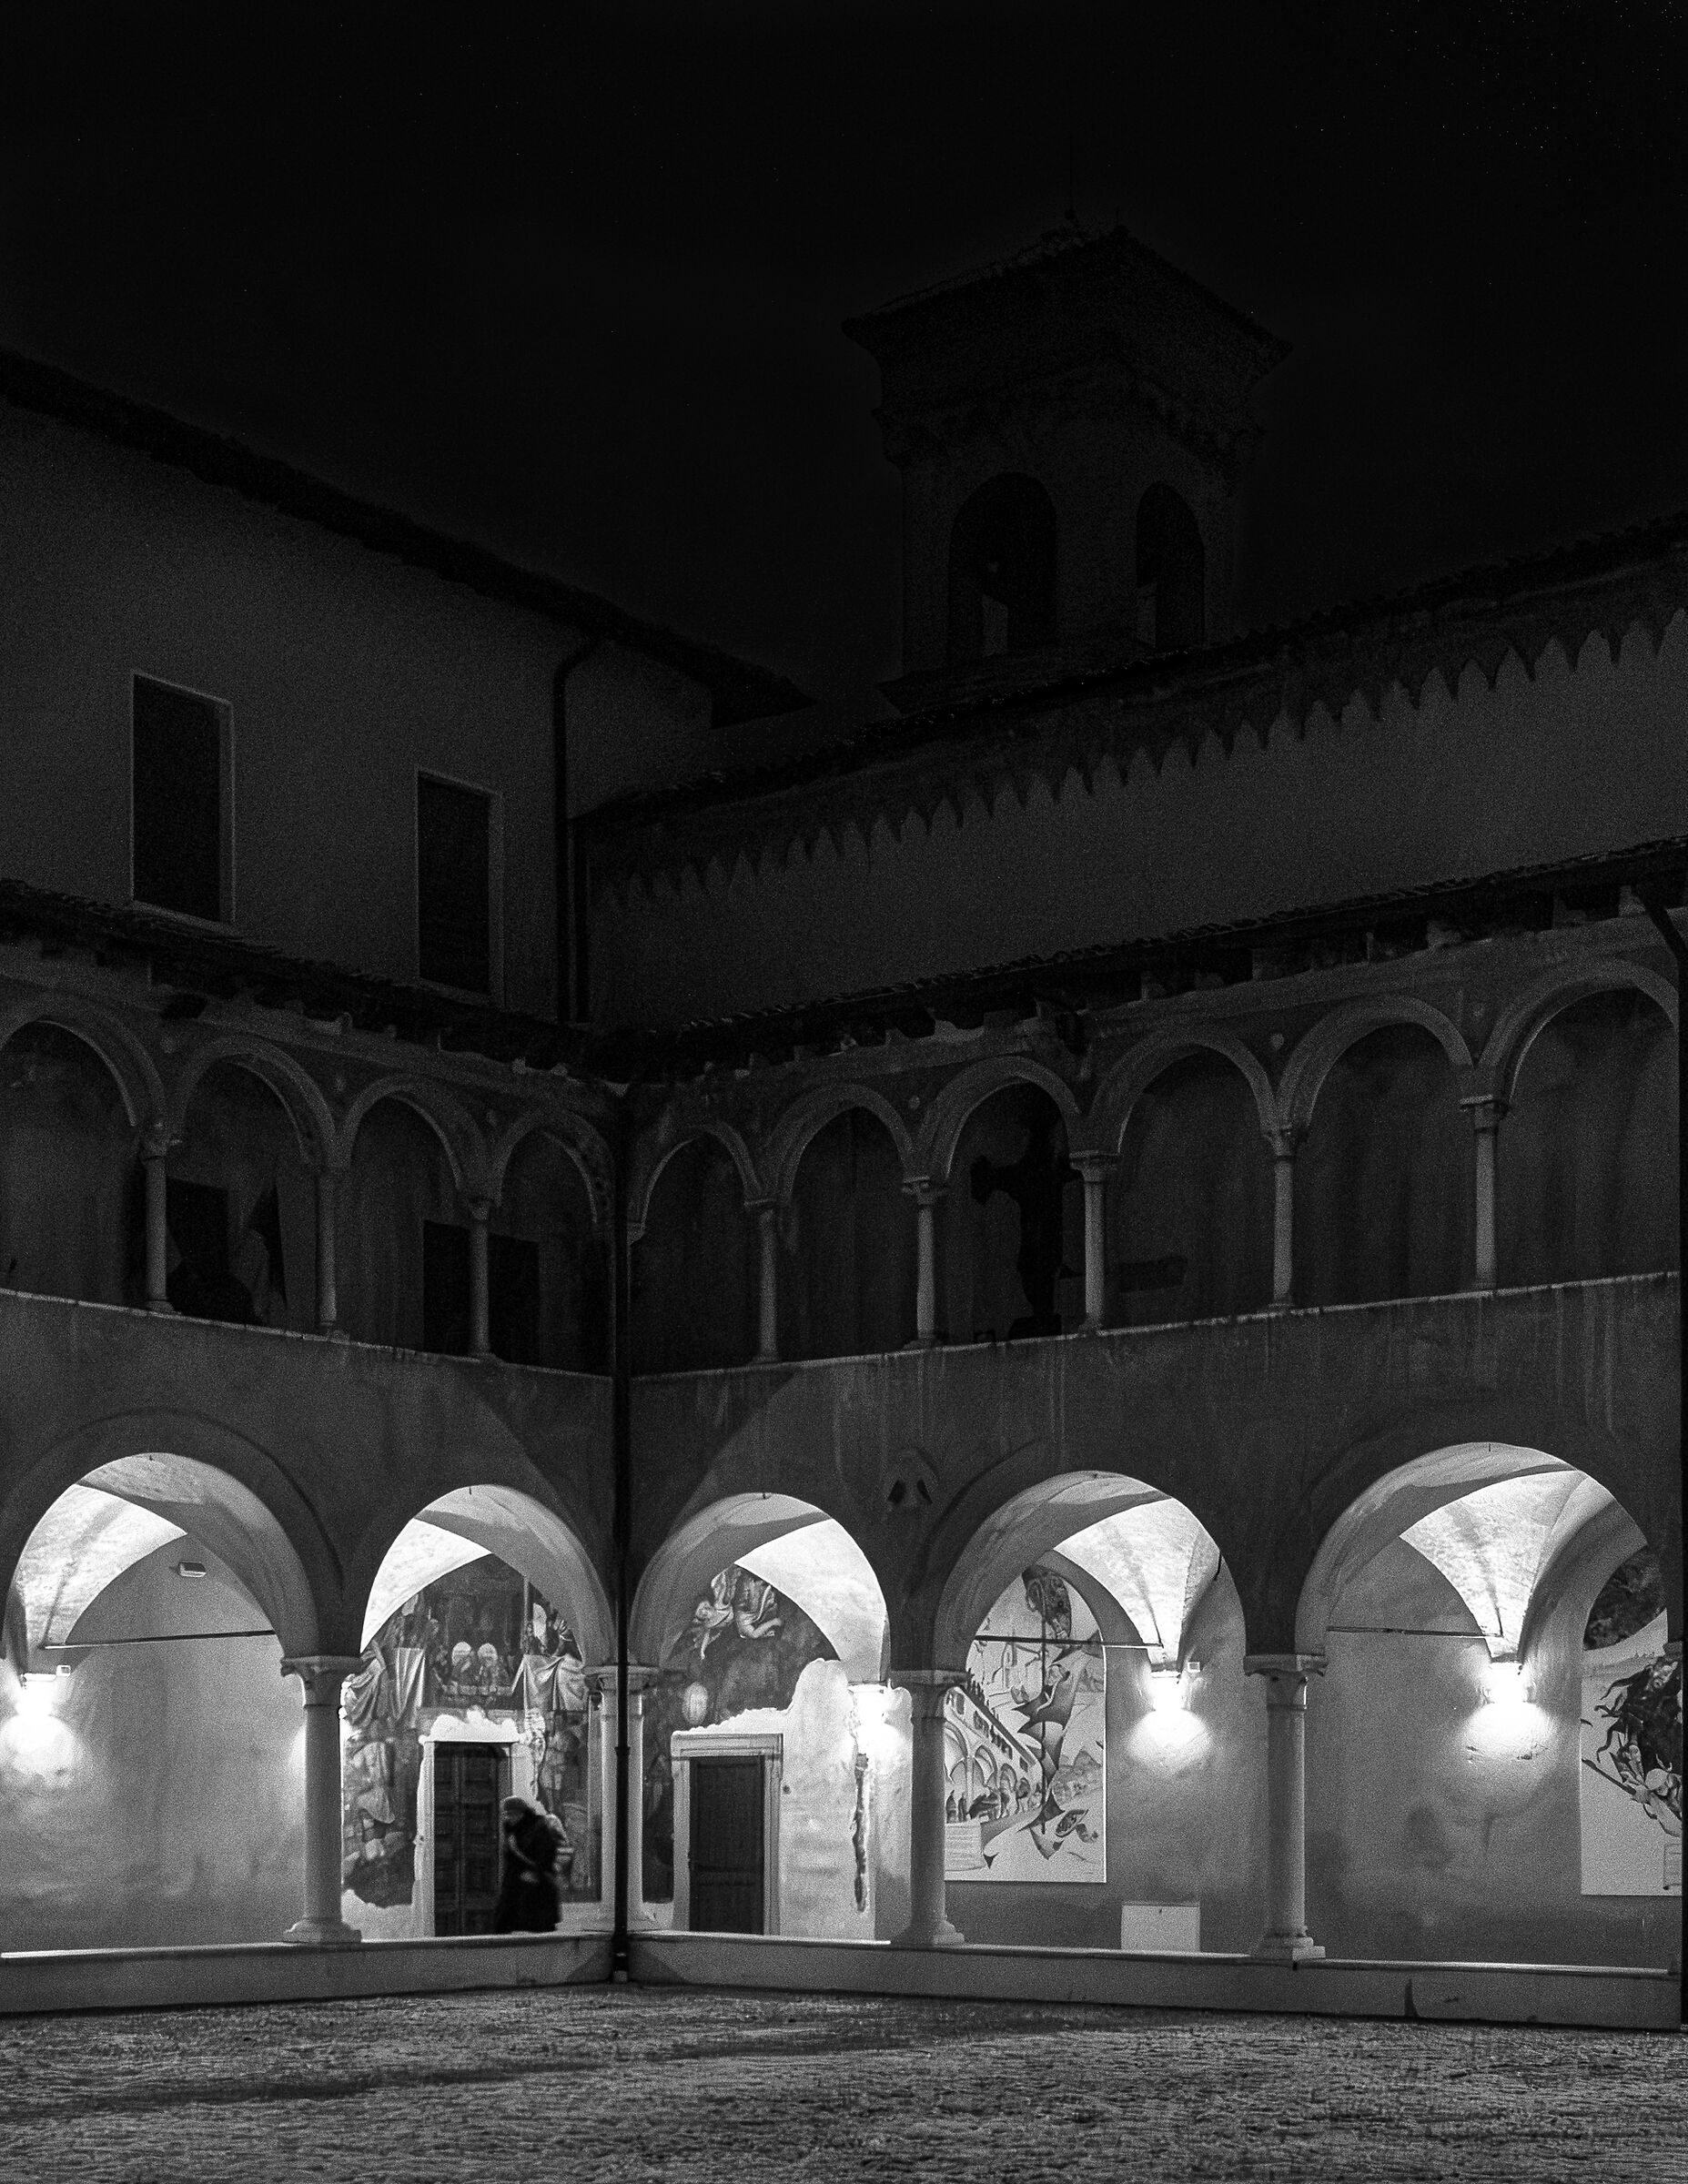 A night in the cloister...